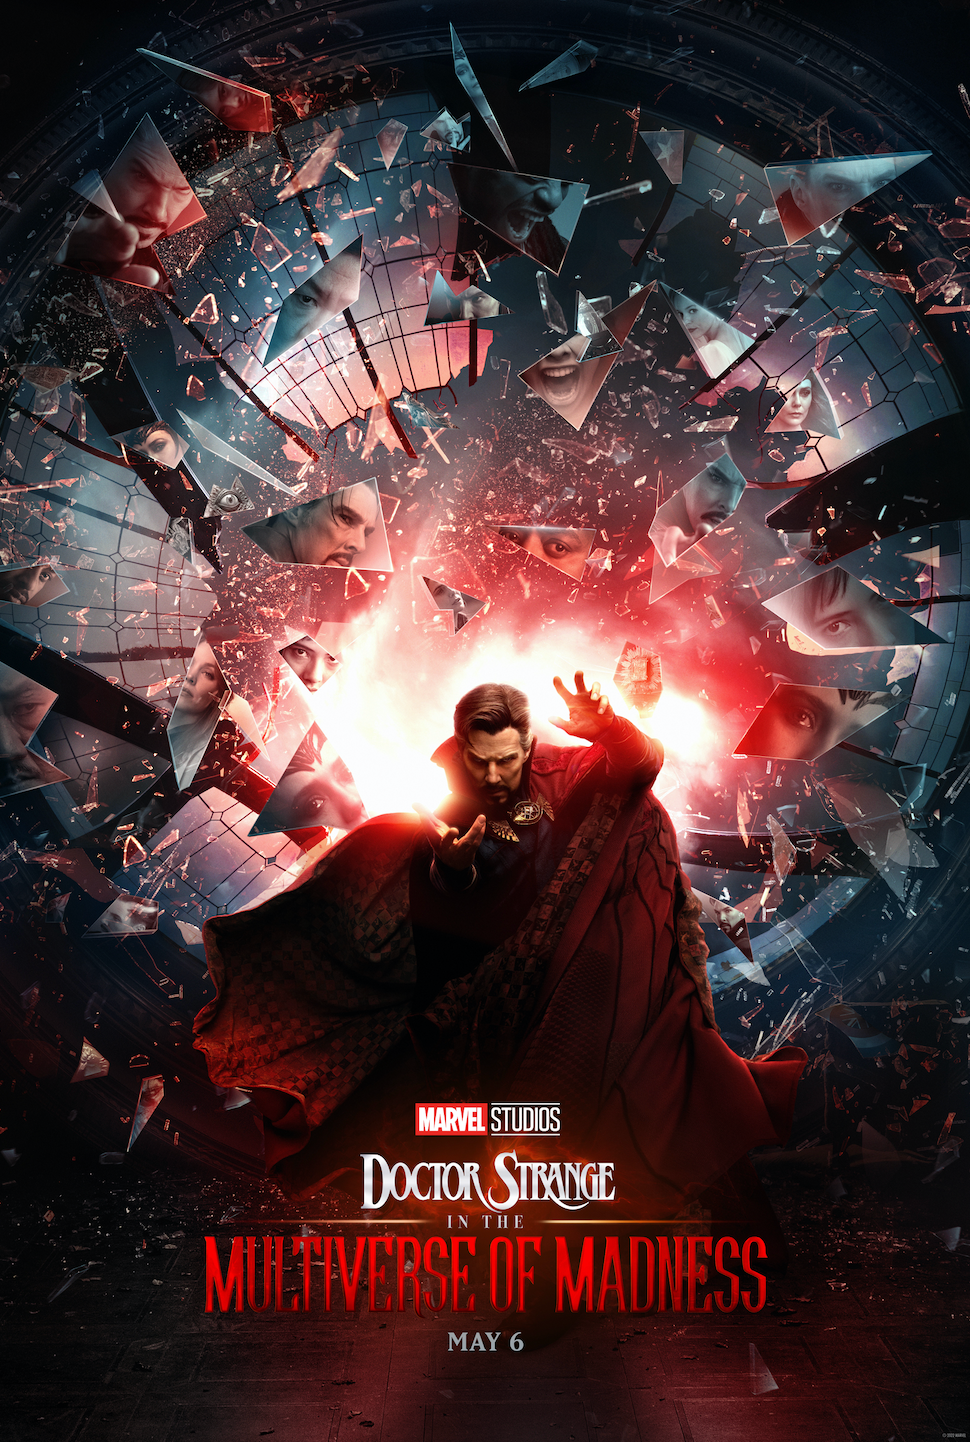 Doctor Strange in the Multiverse of Madness Trailer & Poster Released